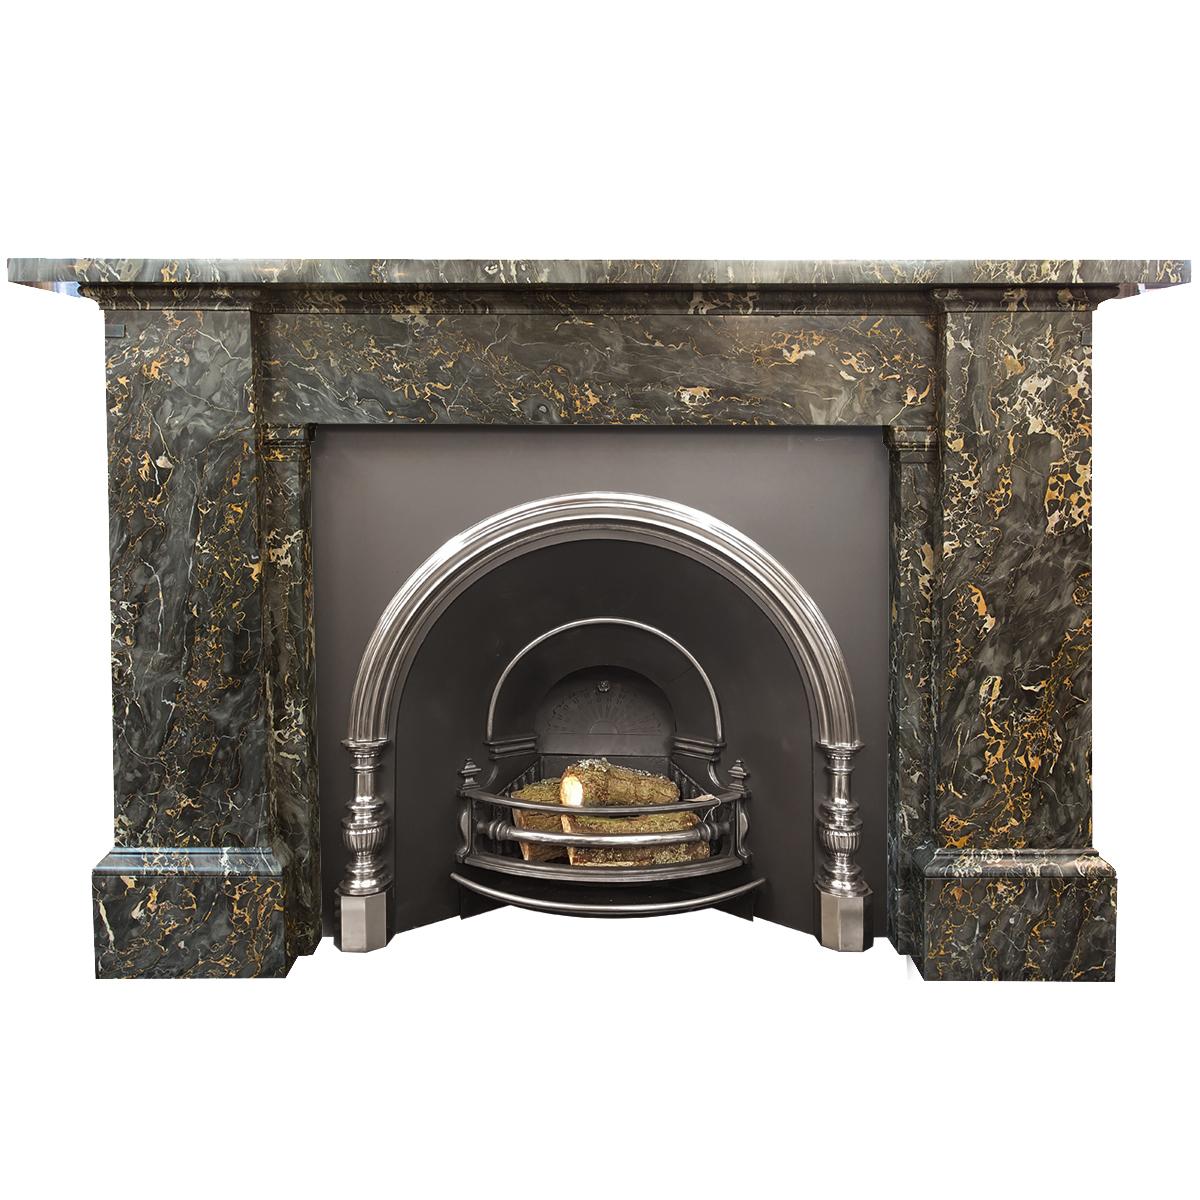 Large Portoro Marble Fireplace Mantel For Sale